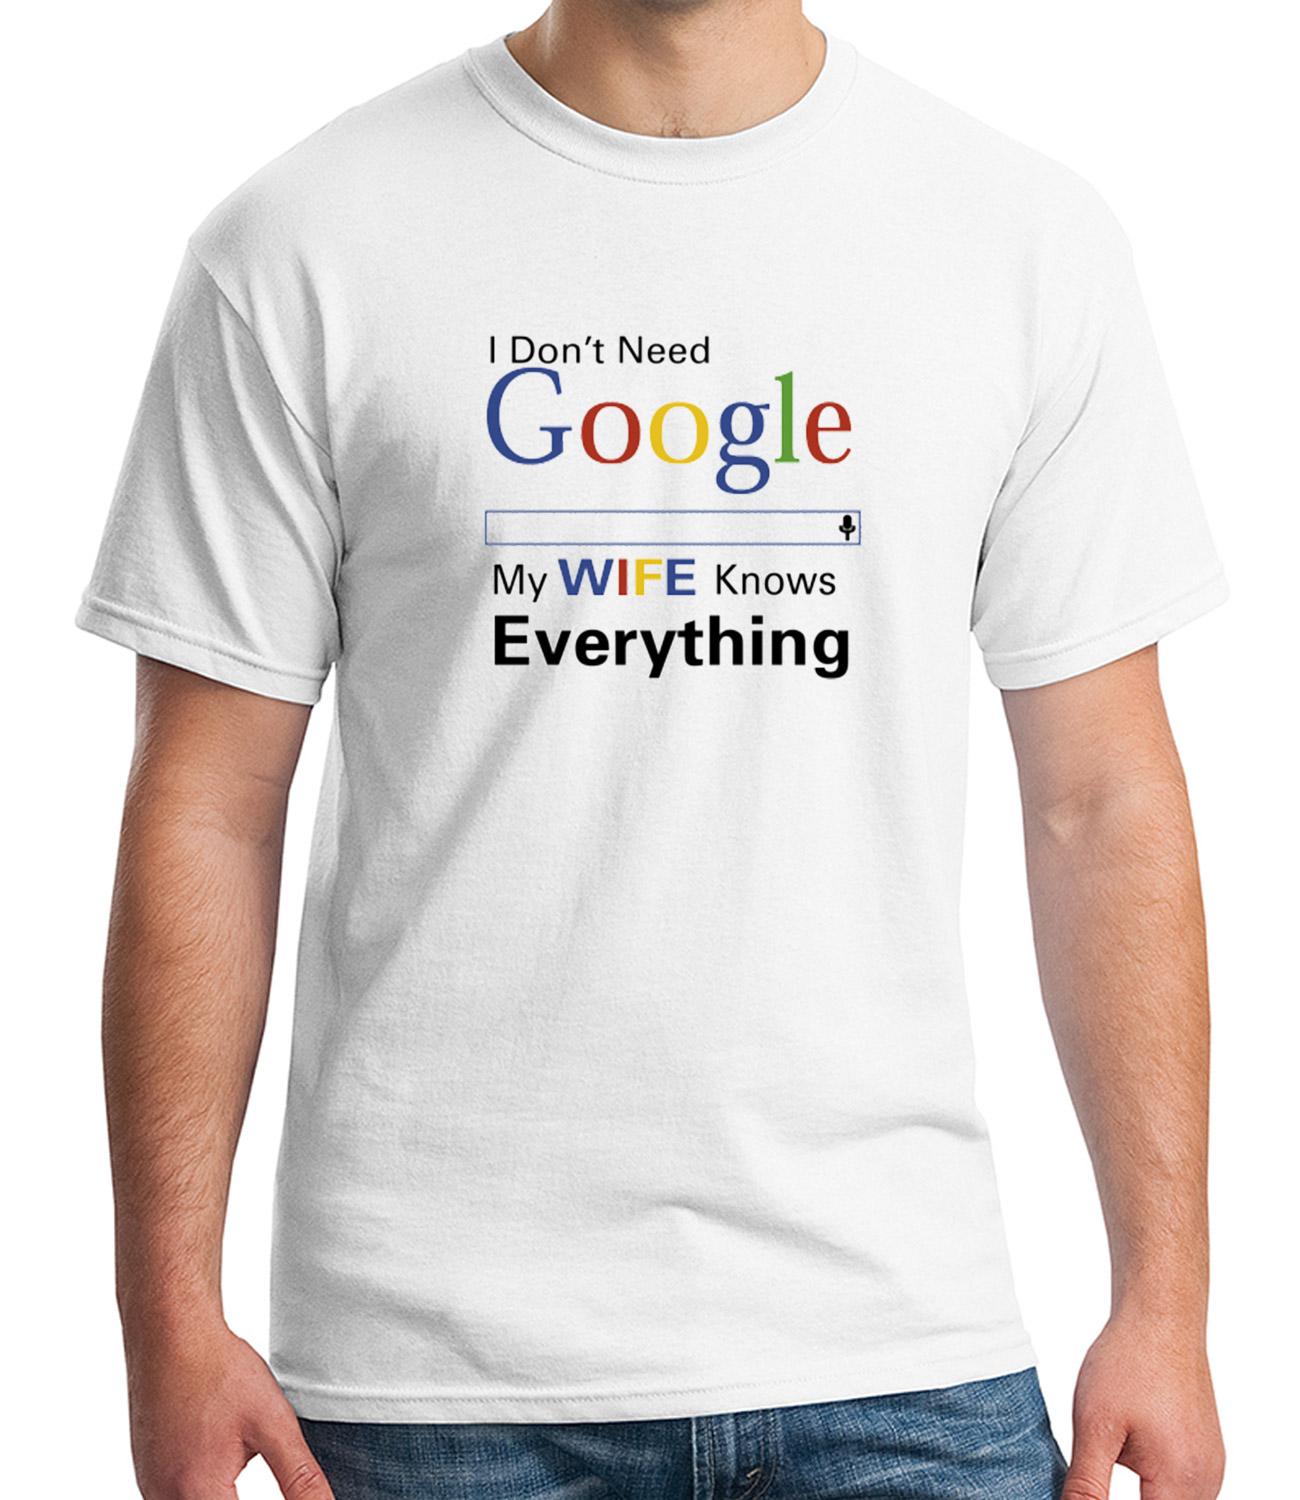 Adult Funny Google Logo - Funny Proud of Wife Adult's T-shirt She Knows Everything Tee for Men ...